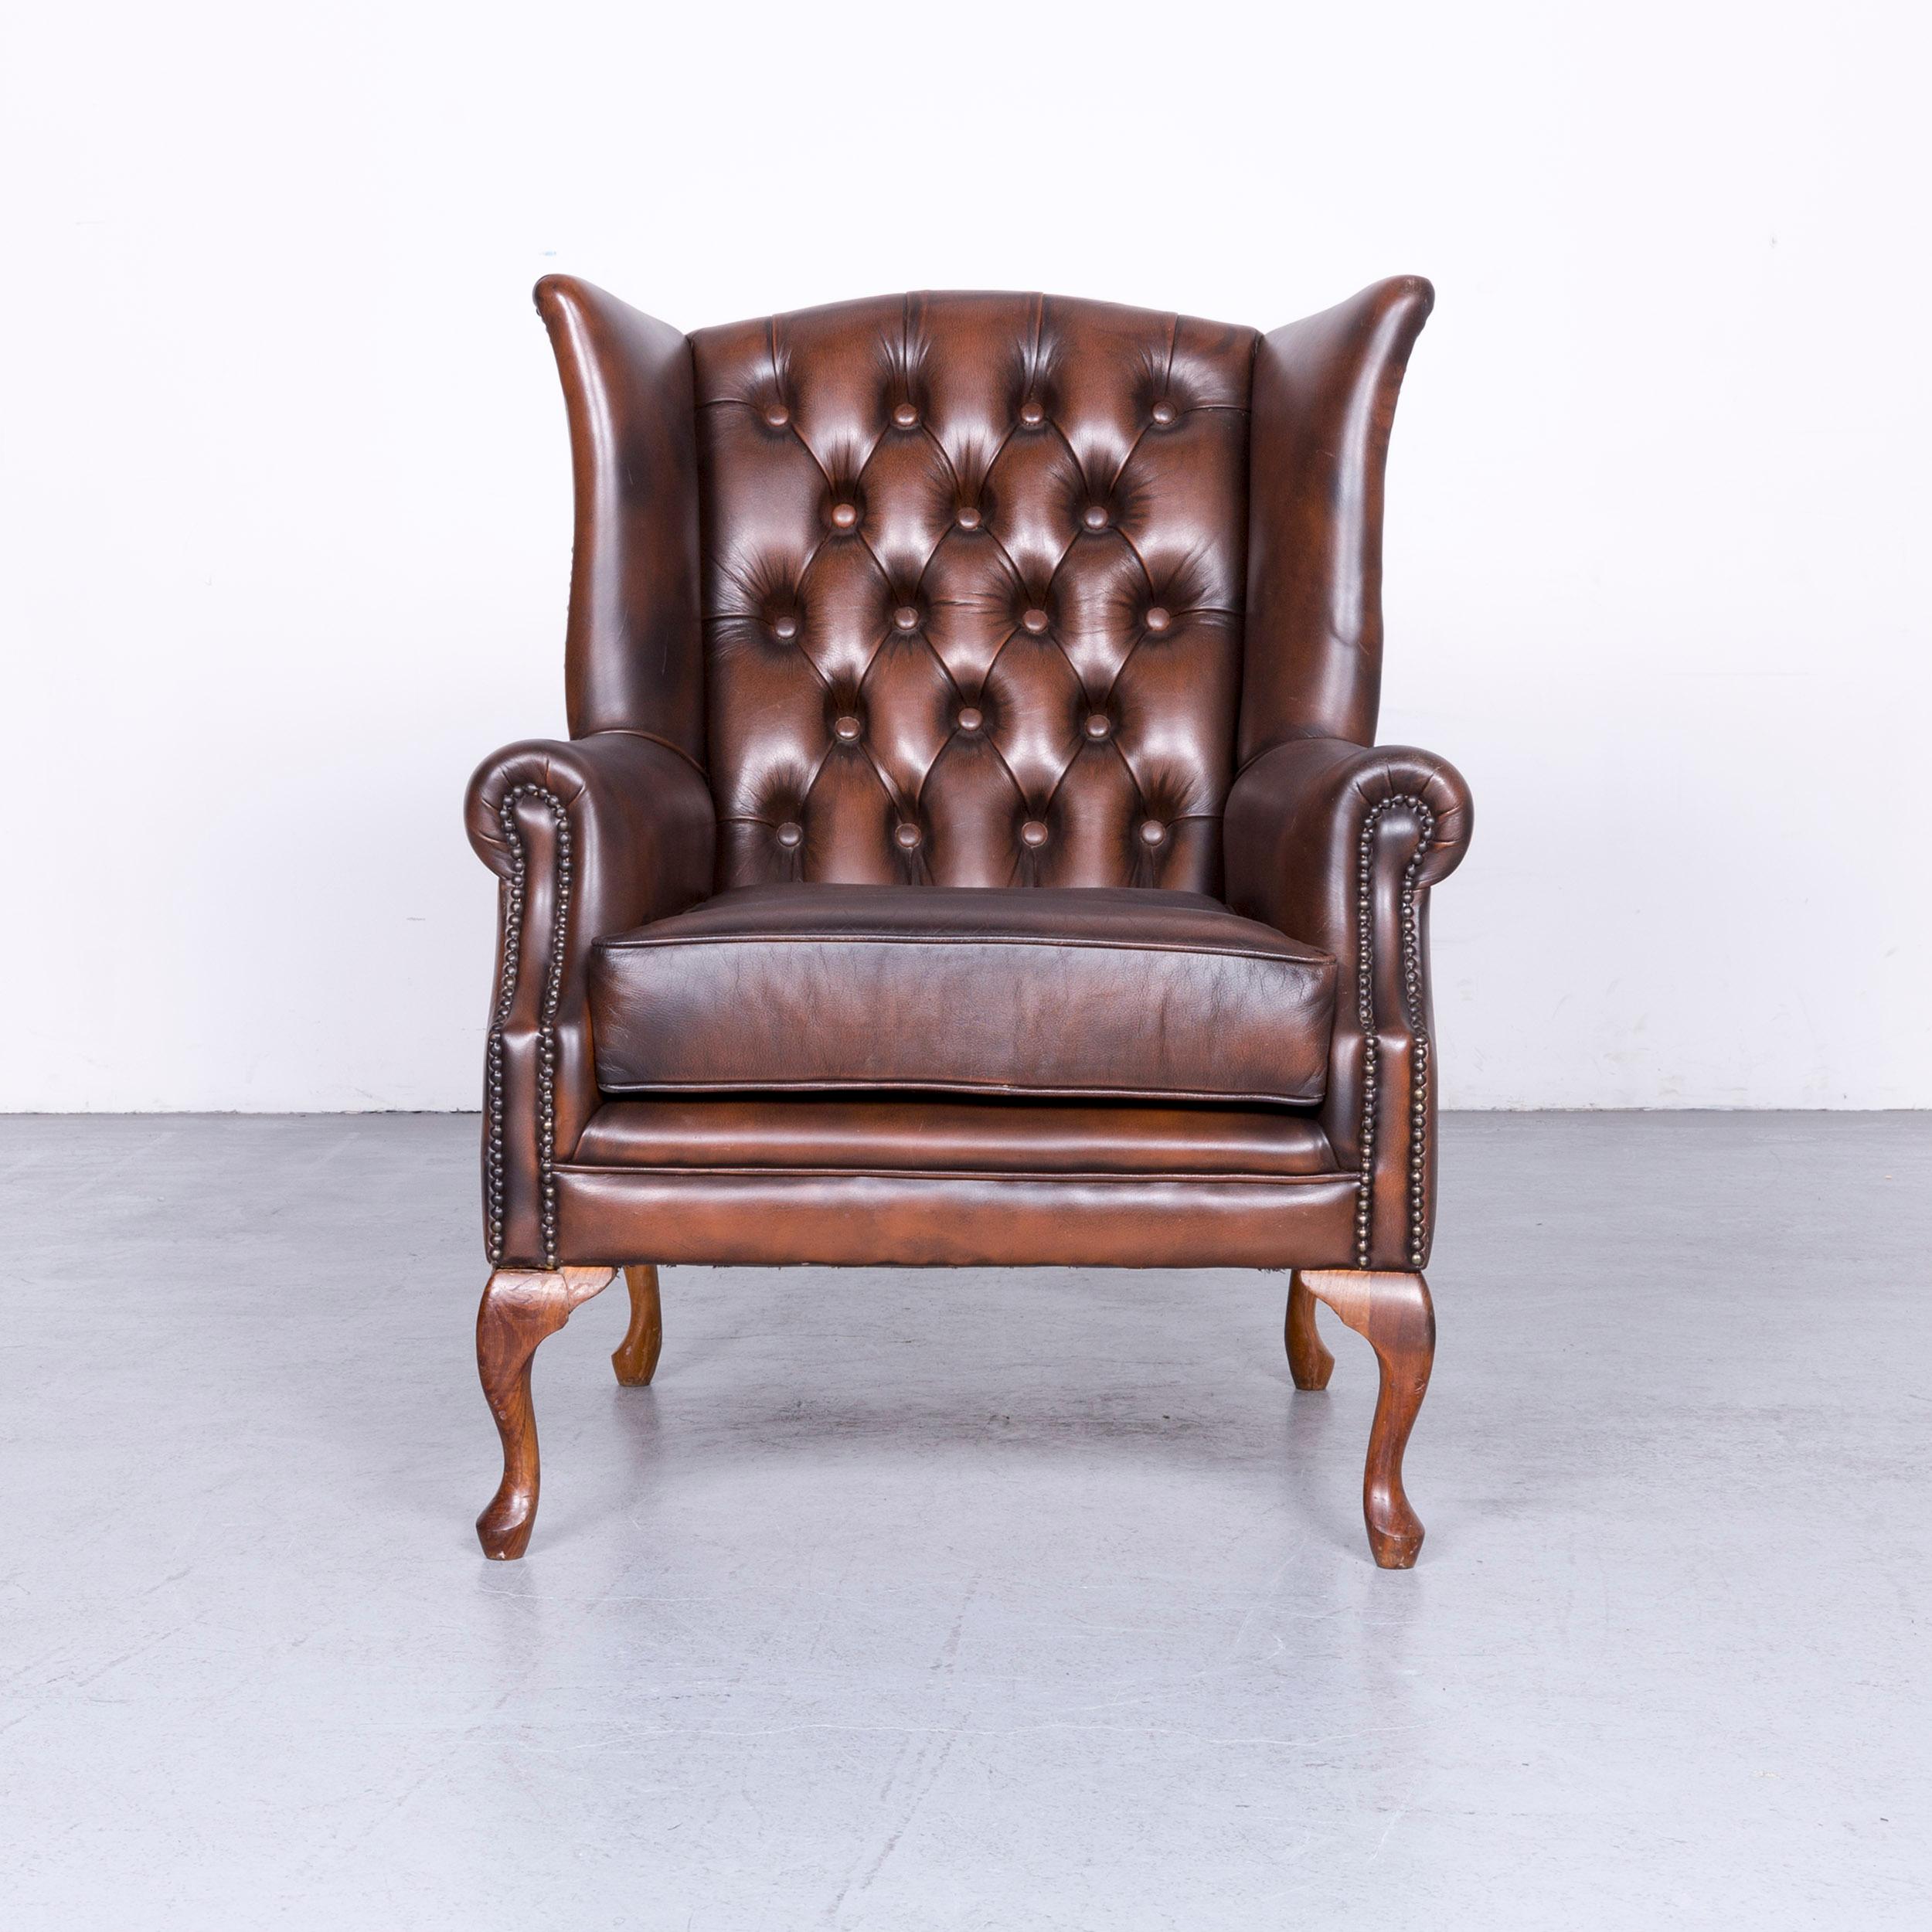 We bring to you a vintage brown chesterfield leather armchair buttoned clubchair.